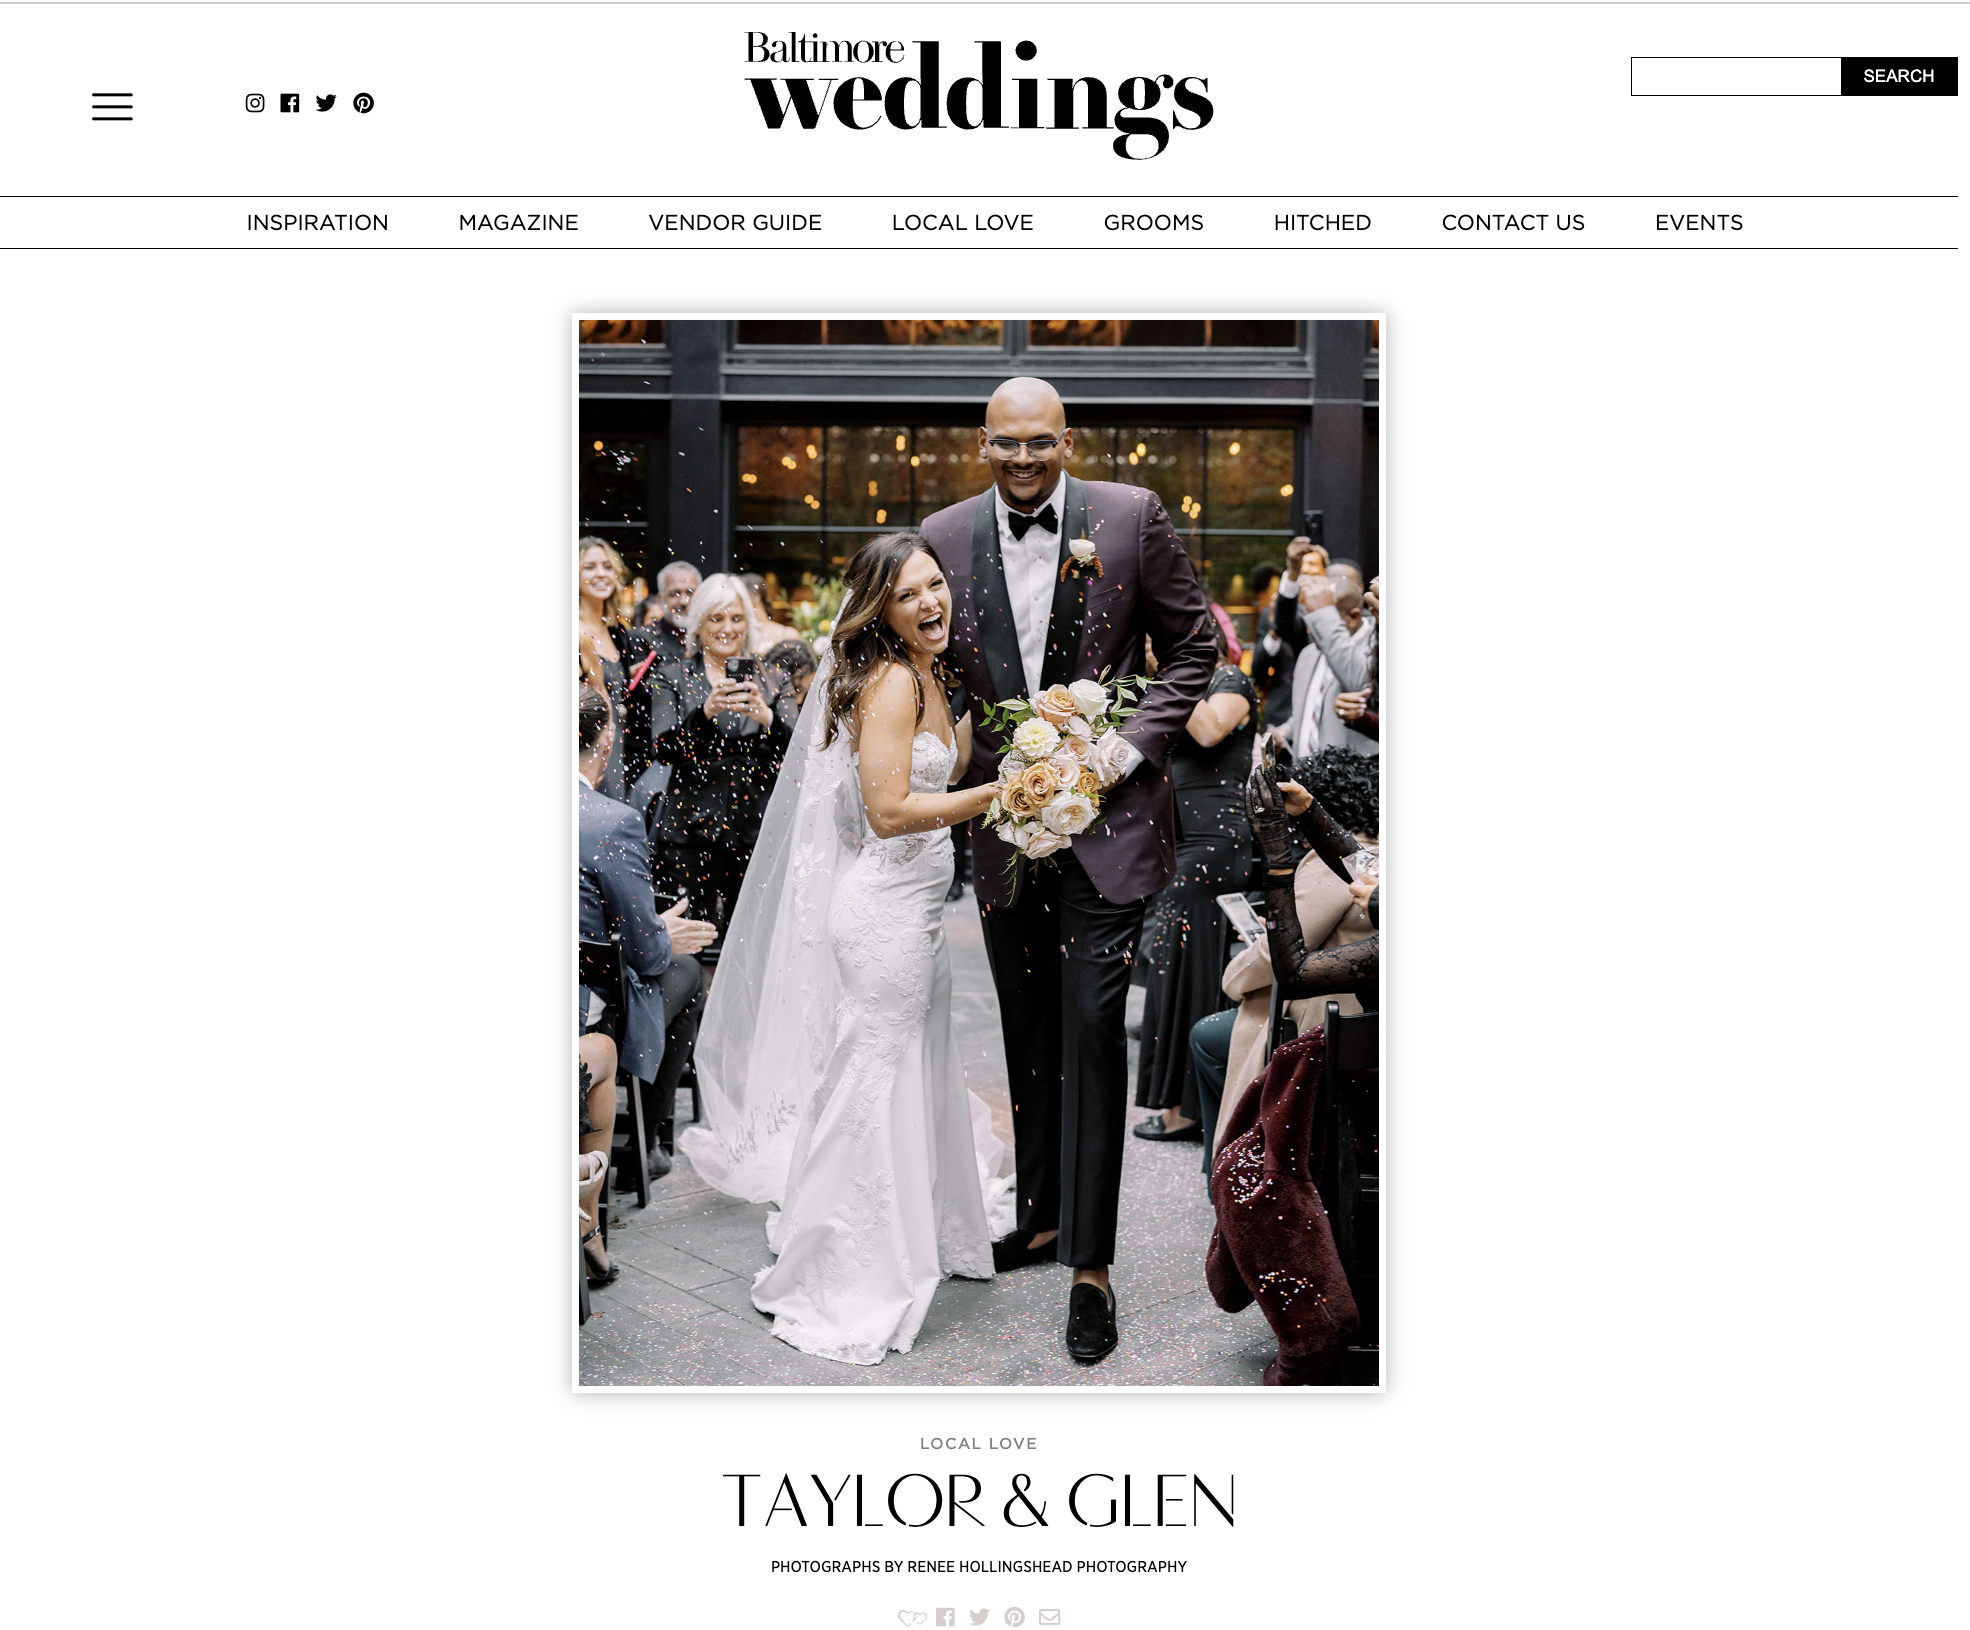 Taylor & Glen's Sunset Tone Sagamore Pendry Baltimore wedding is Baltimore Weddings "Wedding of the Month". Photographed by film wedding photographer Renee Hollingshead with Pop the Cork Designs, Lynn Vale Studios, and more!